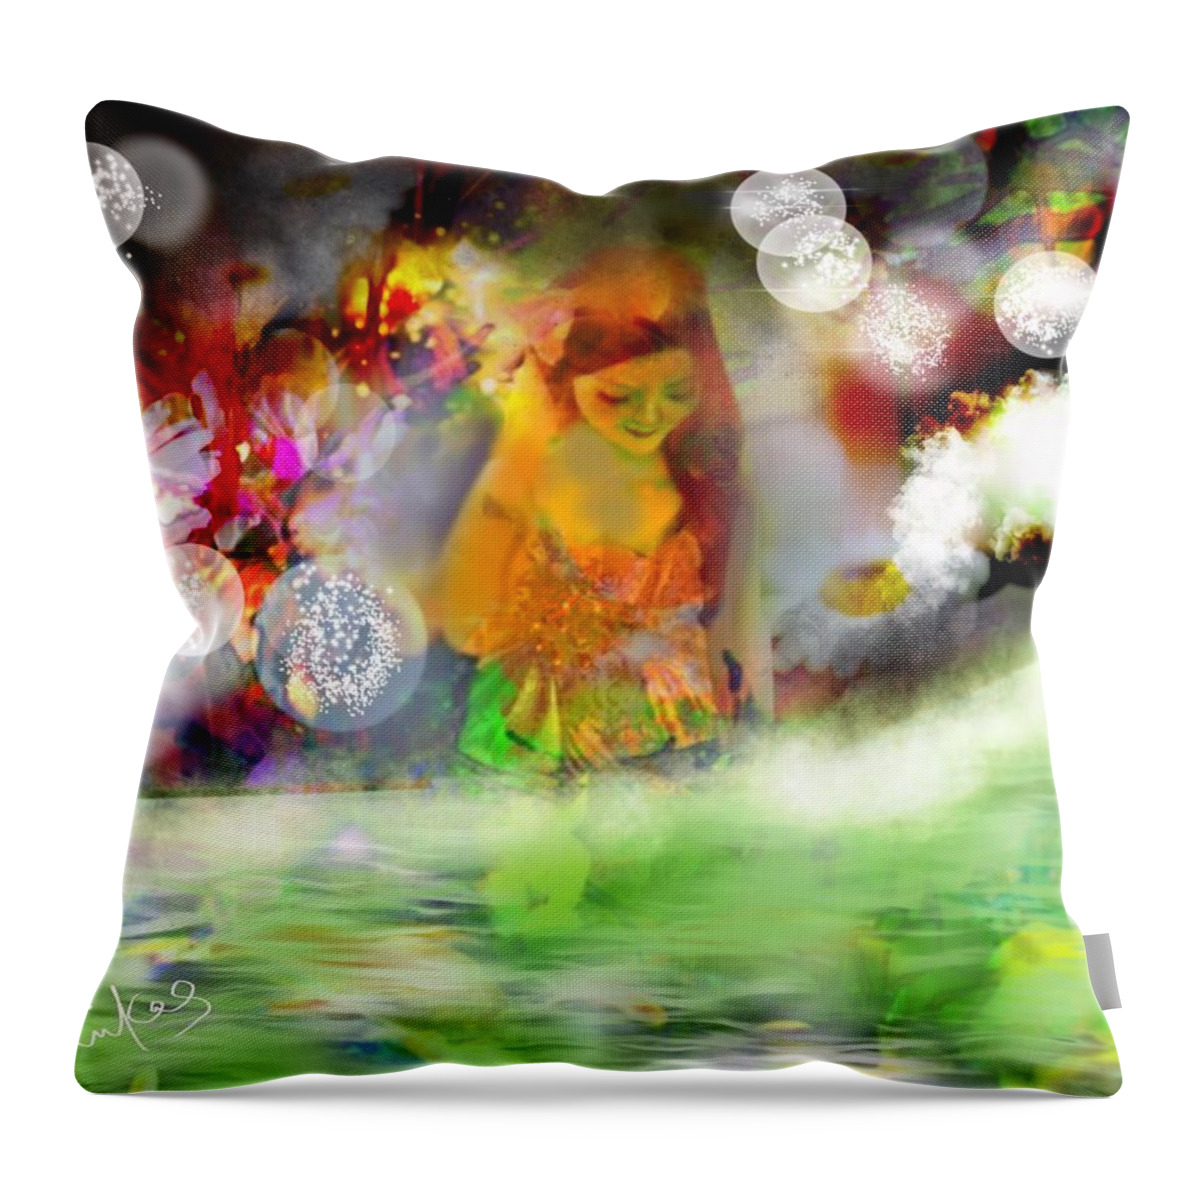 Whimsical Throw Pillow featuring the digital art Whimsical Waters by Serenity Studio Art